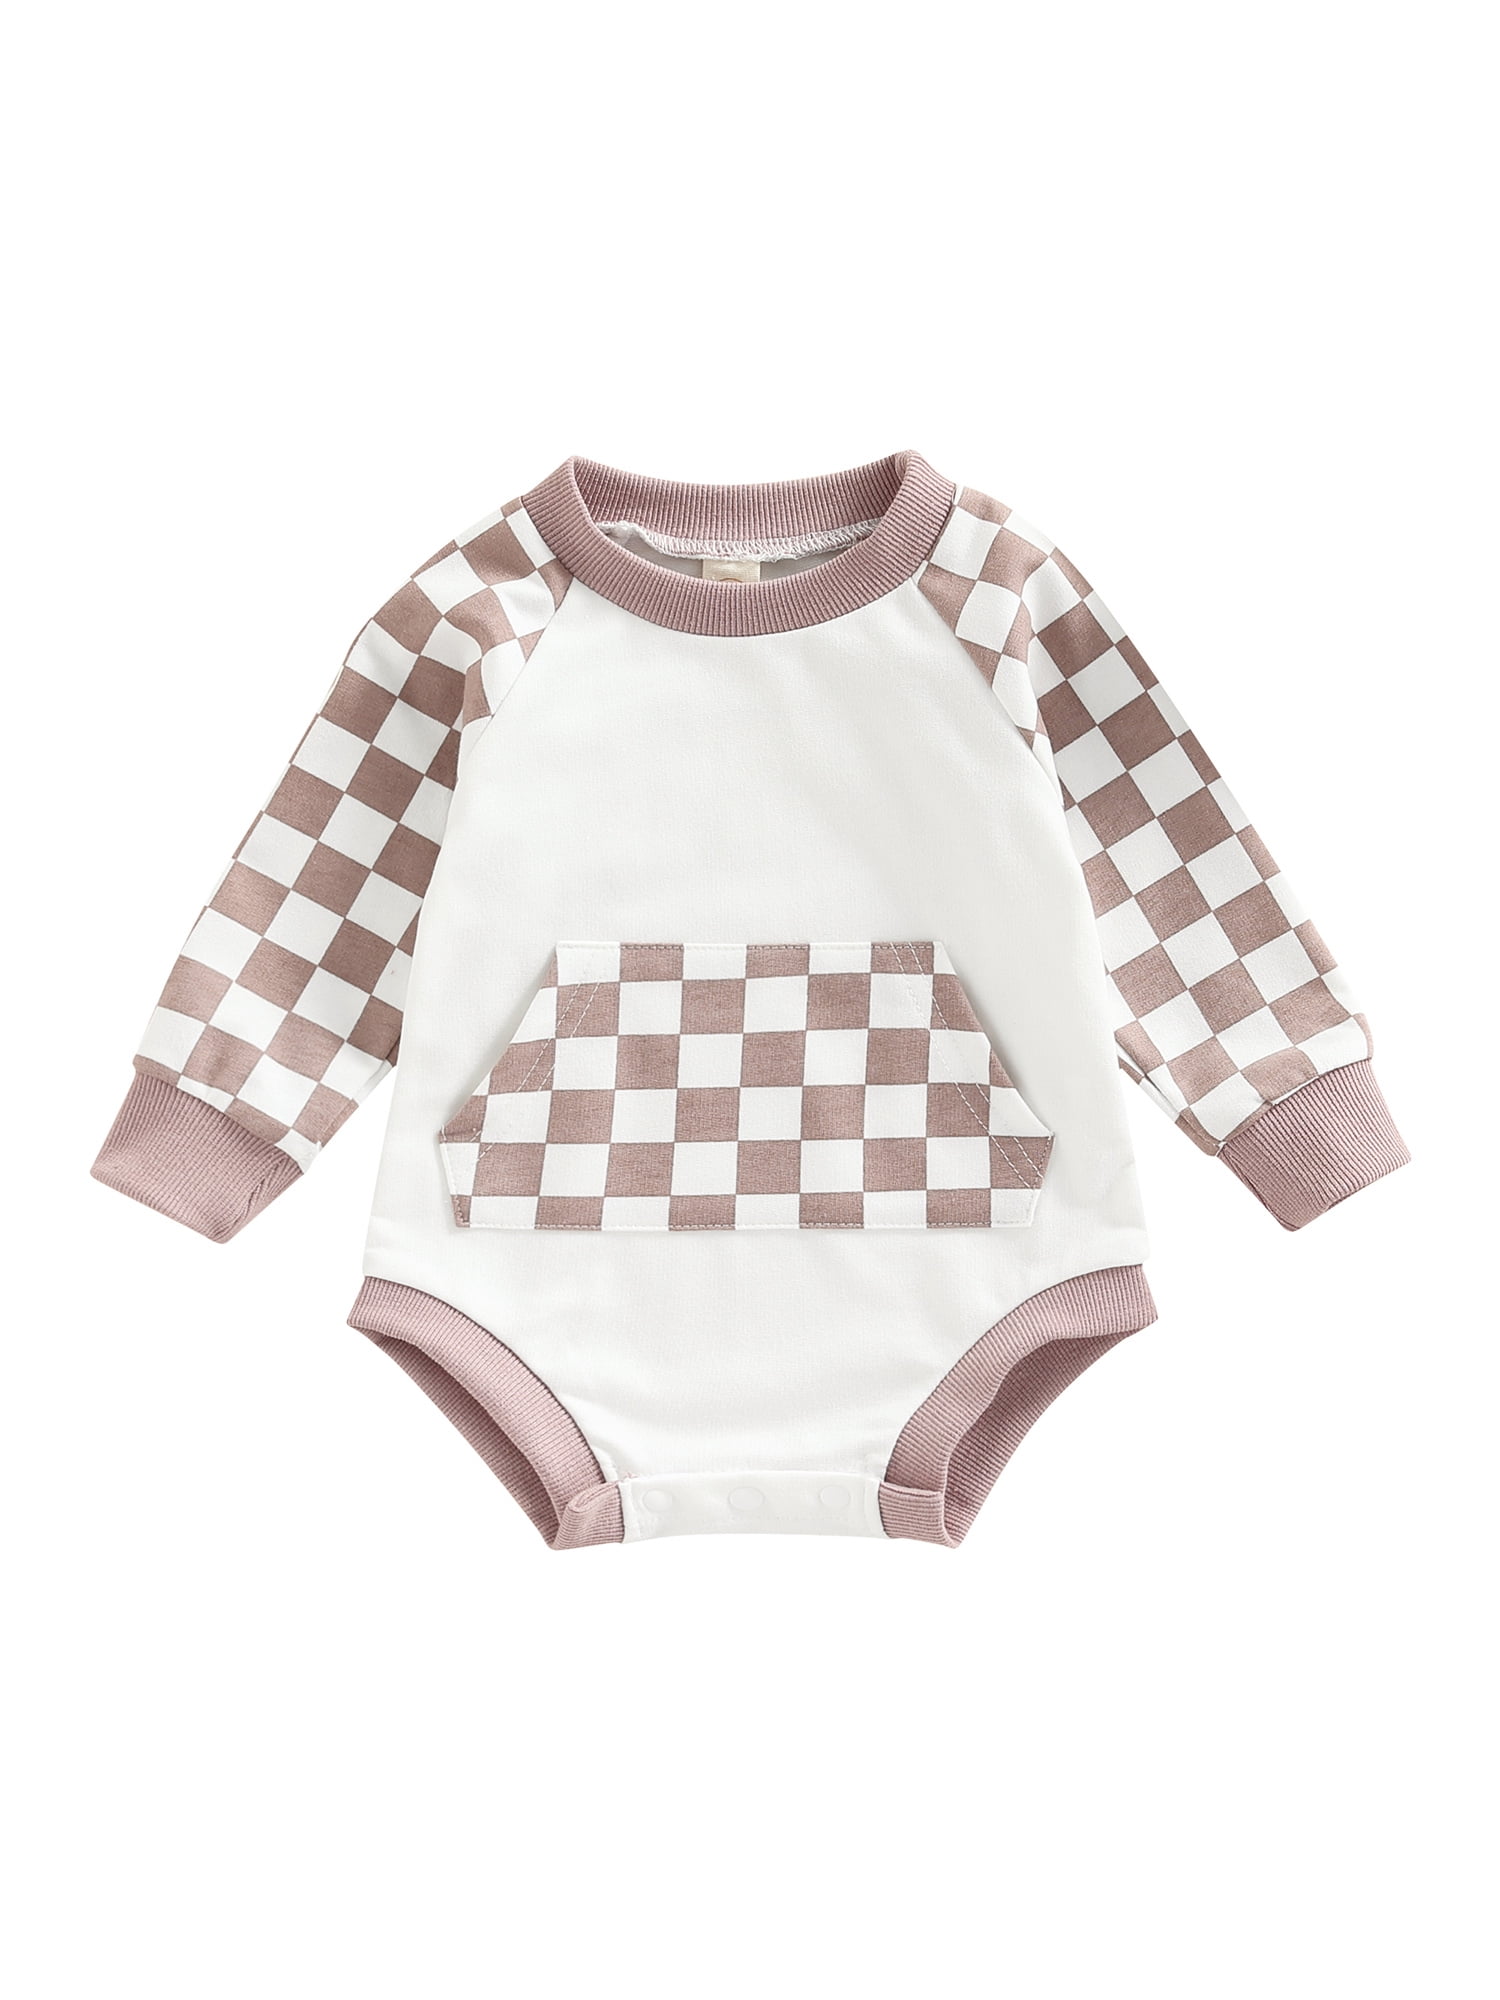  Unisex Infant Baby Clothes Checkerboard Crewneck Sweatshirt  Romper Oversized Long Sleeve Plaid Bubble Bodysuit (Coffee, 0-6 Months):  Clothing, Shoes & Jewelry